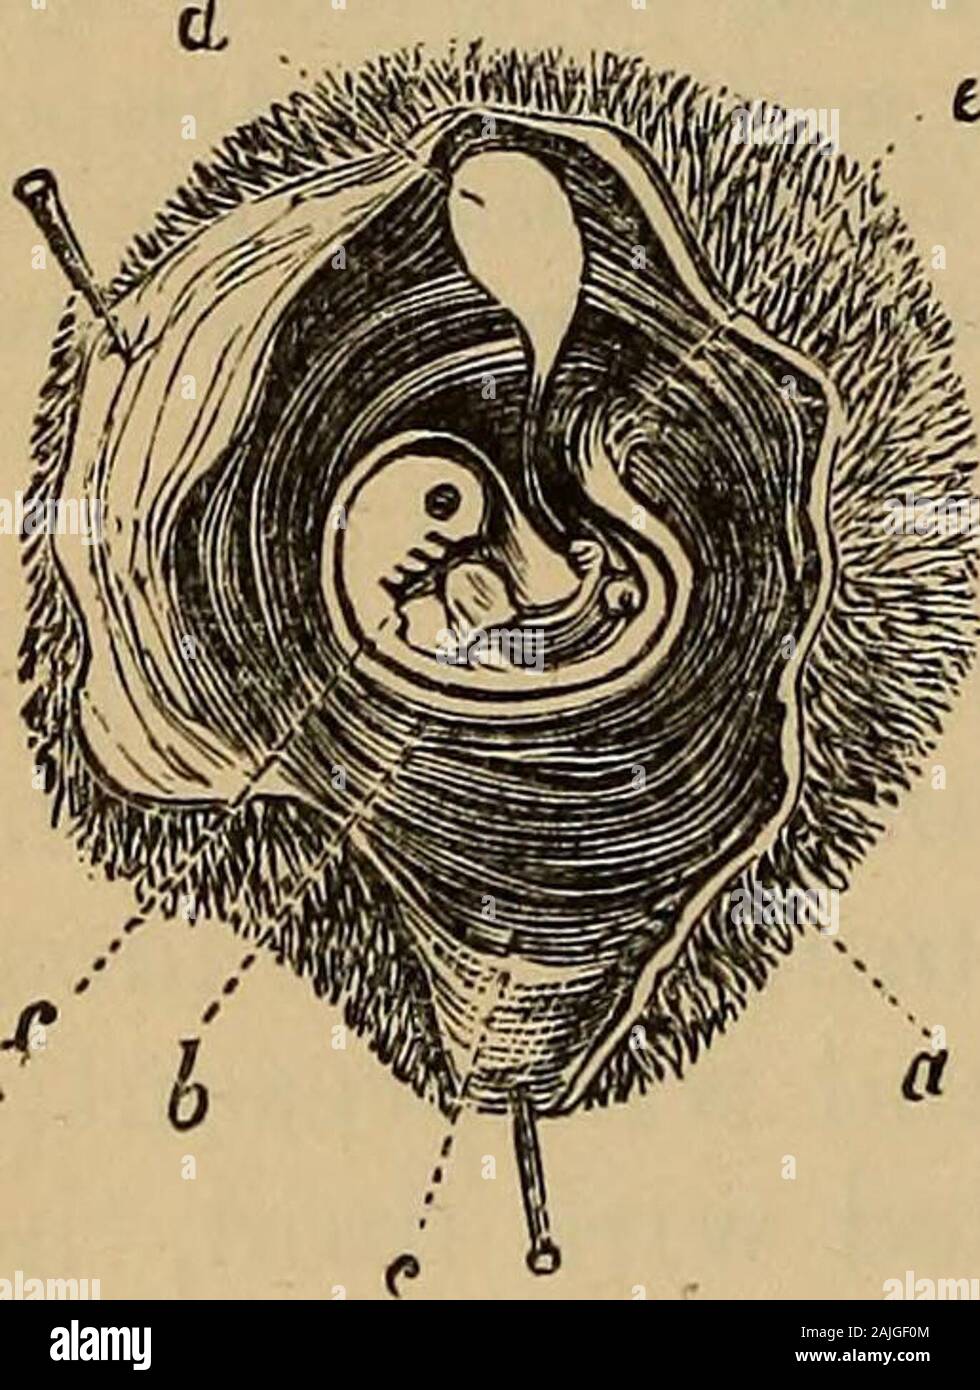 A treatise on the science and practice of midwifery . at the full period of preg-nancy. The umbilical vesicle is filled with ayellowish fluid, containing many oil and fatglobules, similar to the yelk of an egg. The Allantois.—Somewhere about the twen-tieth day after conception a small vesicle isformed towards the caudal extremity of thefoetus, which is called the allantois. It is welldeveloped and persistent in many of the loweranimals, but in man it is merely a temporarystructure, and disappears after it has fulfilled itsfunctions. Its study, therefore, in the humanrace has been a matter of d Stock Photo